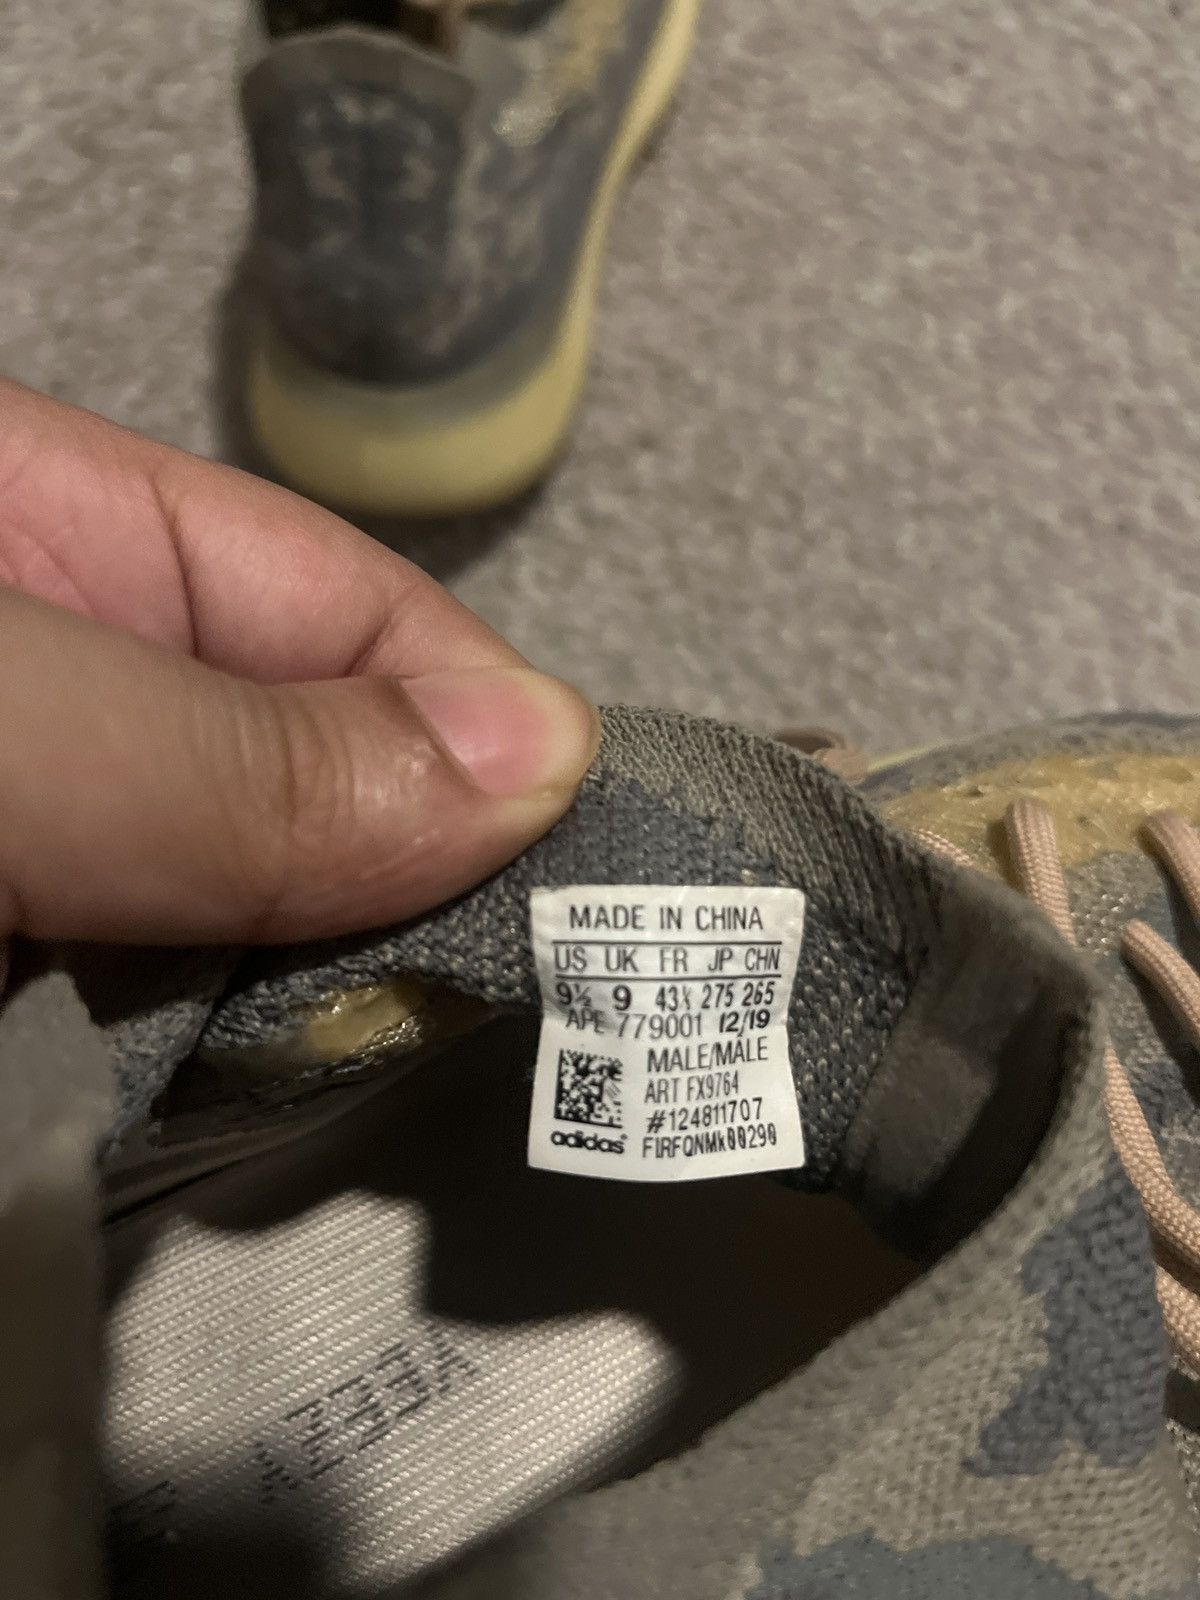 wholesale high quality Yeezy mist non reflective